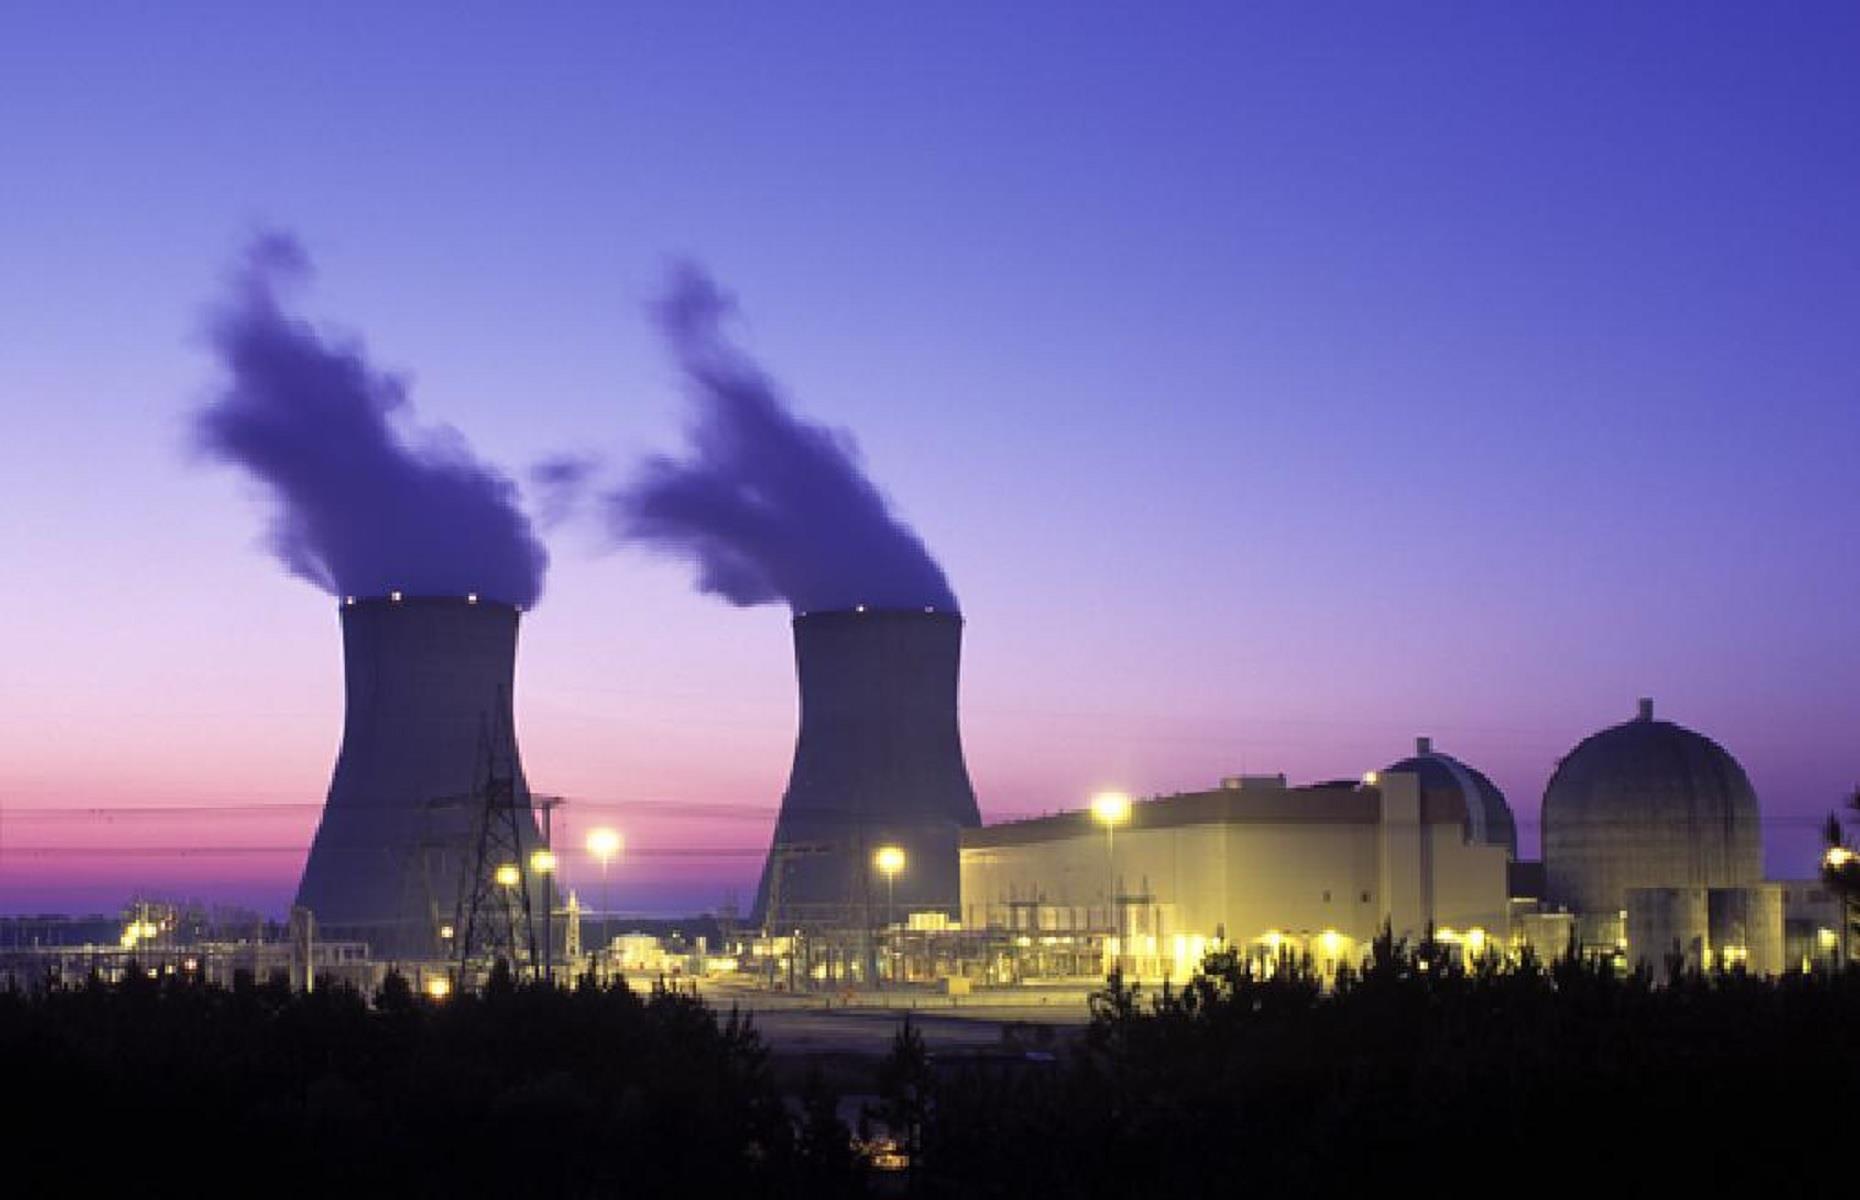 Vogtle Electric Generating Plant, USA: six years late, over budget by $14.5 billion (£10.8bn) 